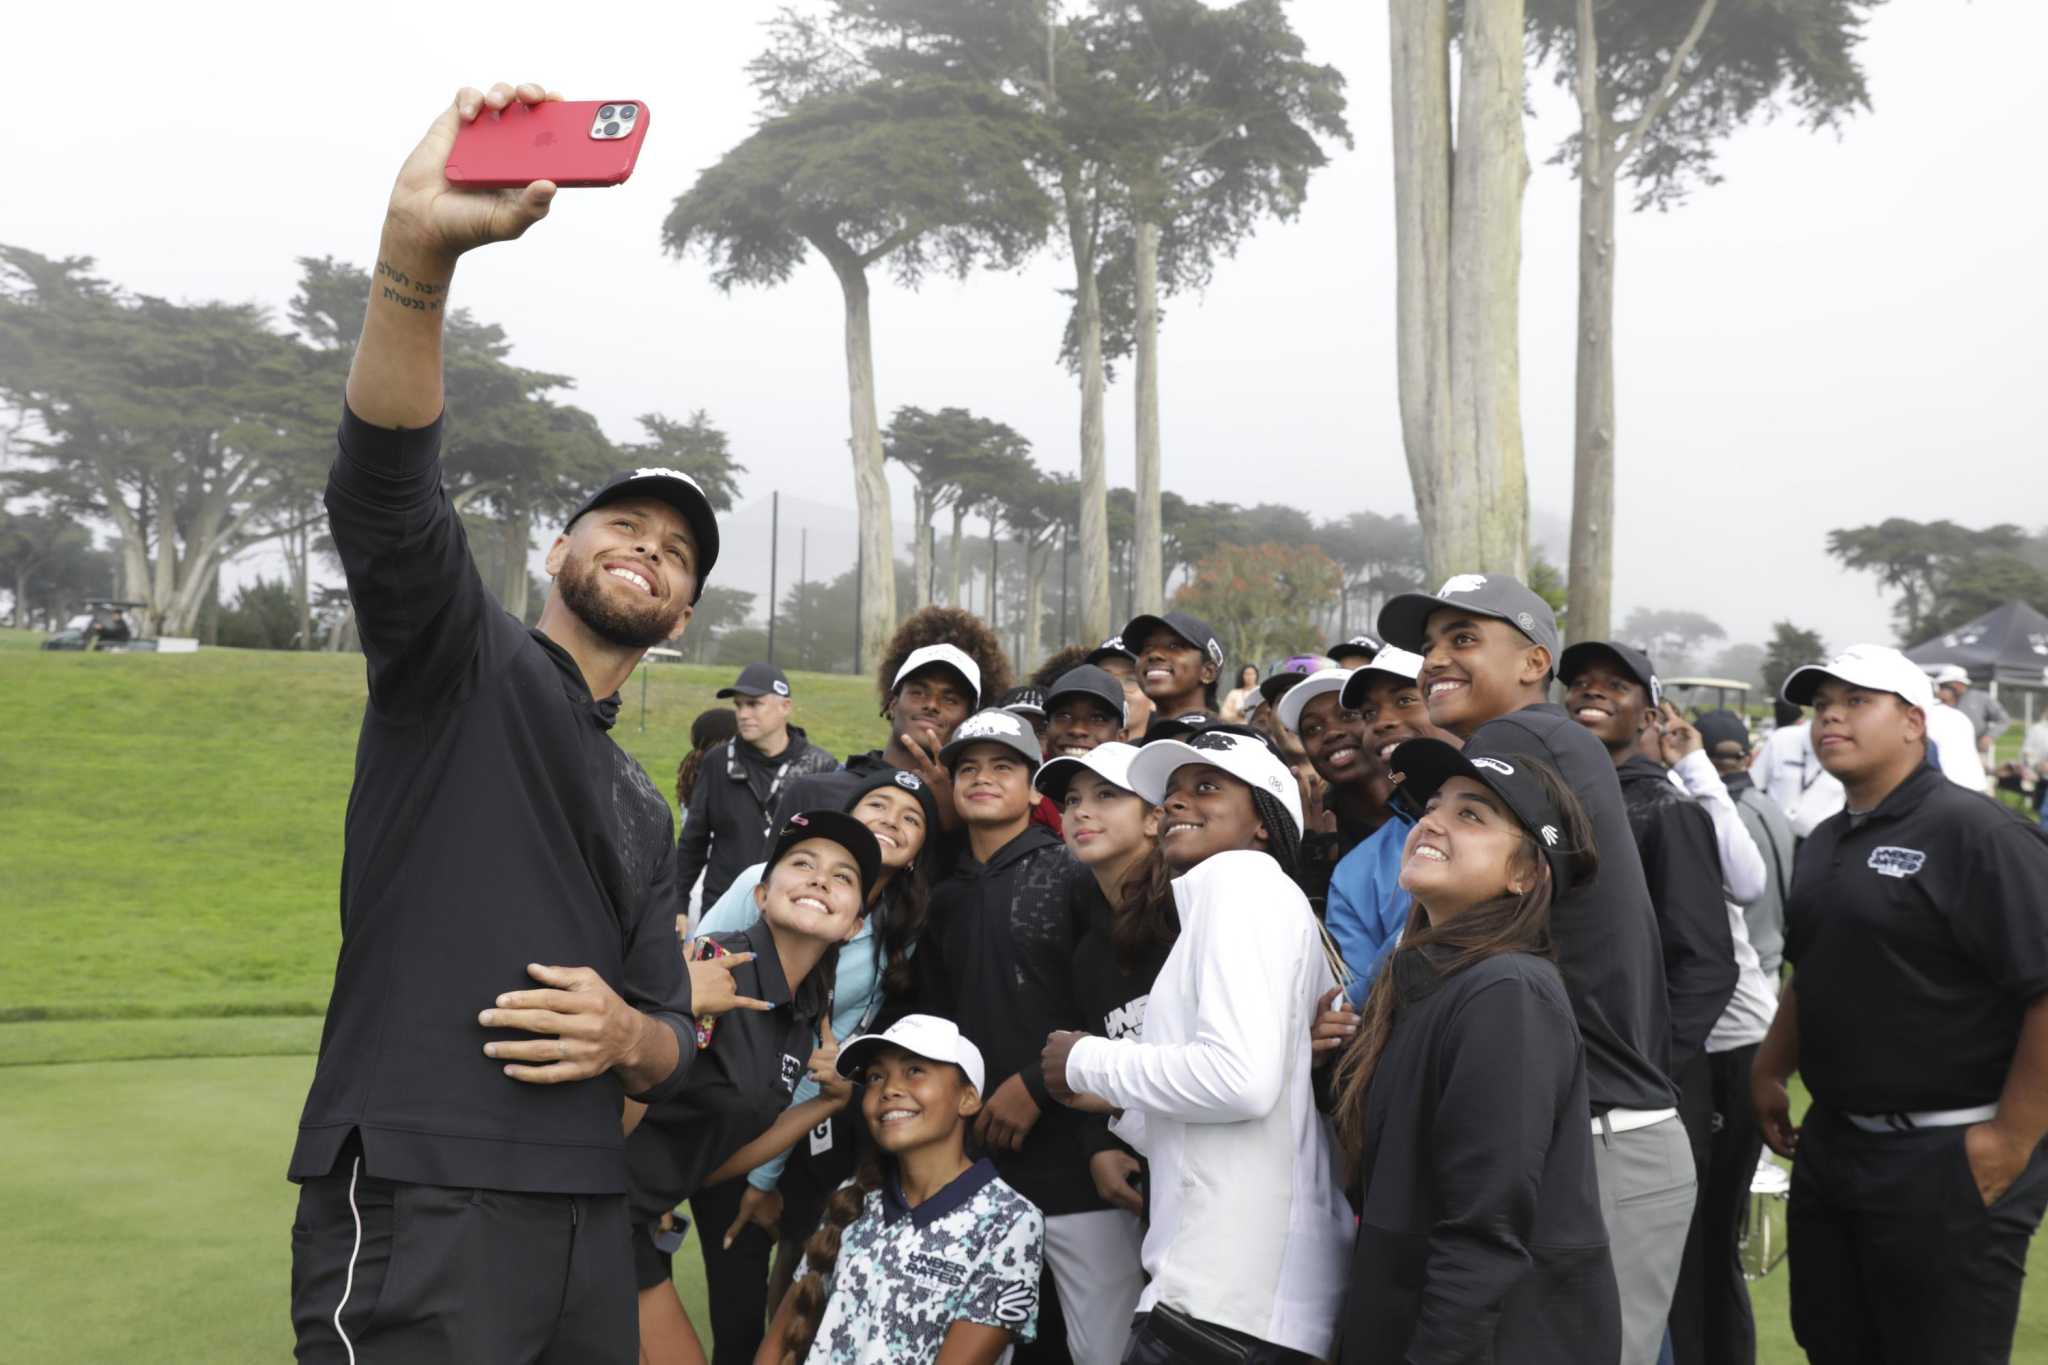 Steph Curry’s Underrated Golf Tour puts gender, racial equity in spotlight